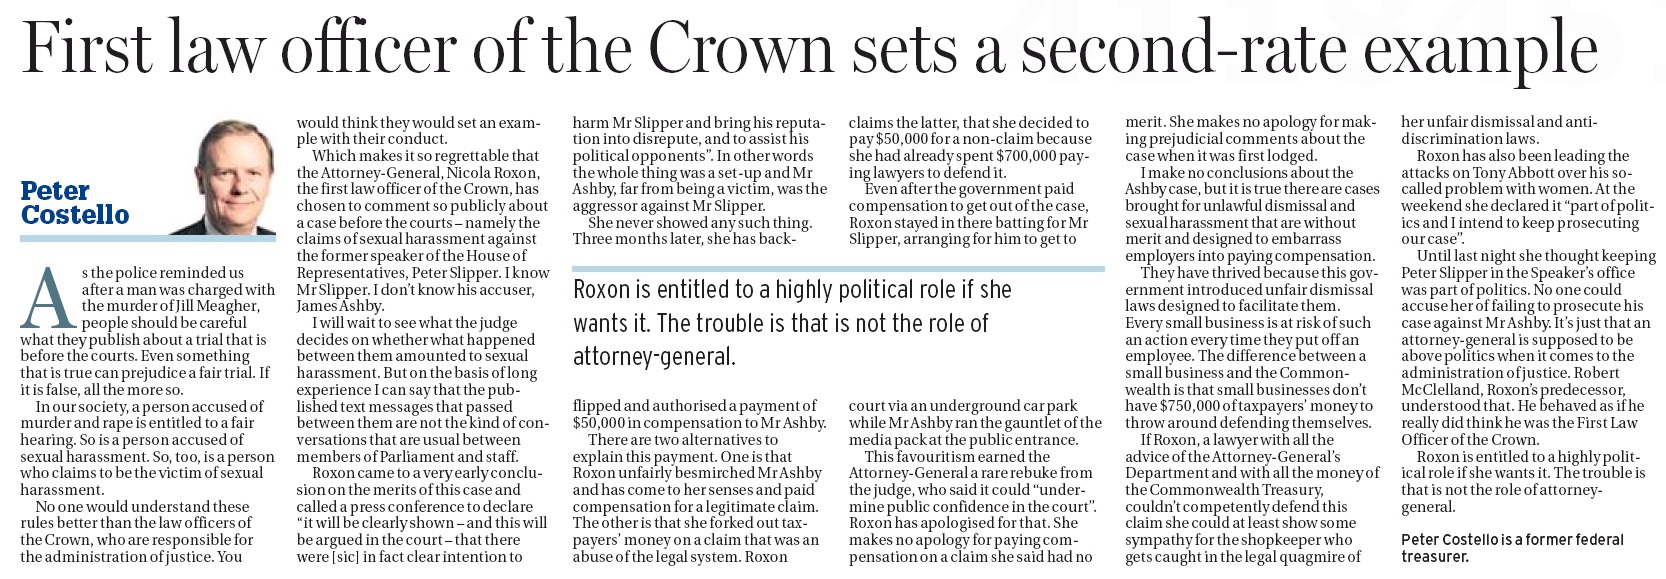 smh_-_first_law_officer_of_the_crown_sets_a_second-rate_example_-_10_october_2012jpg